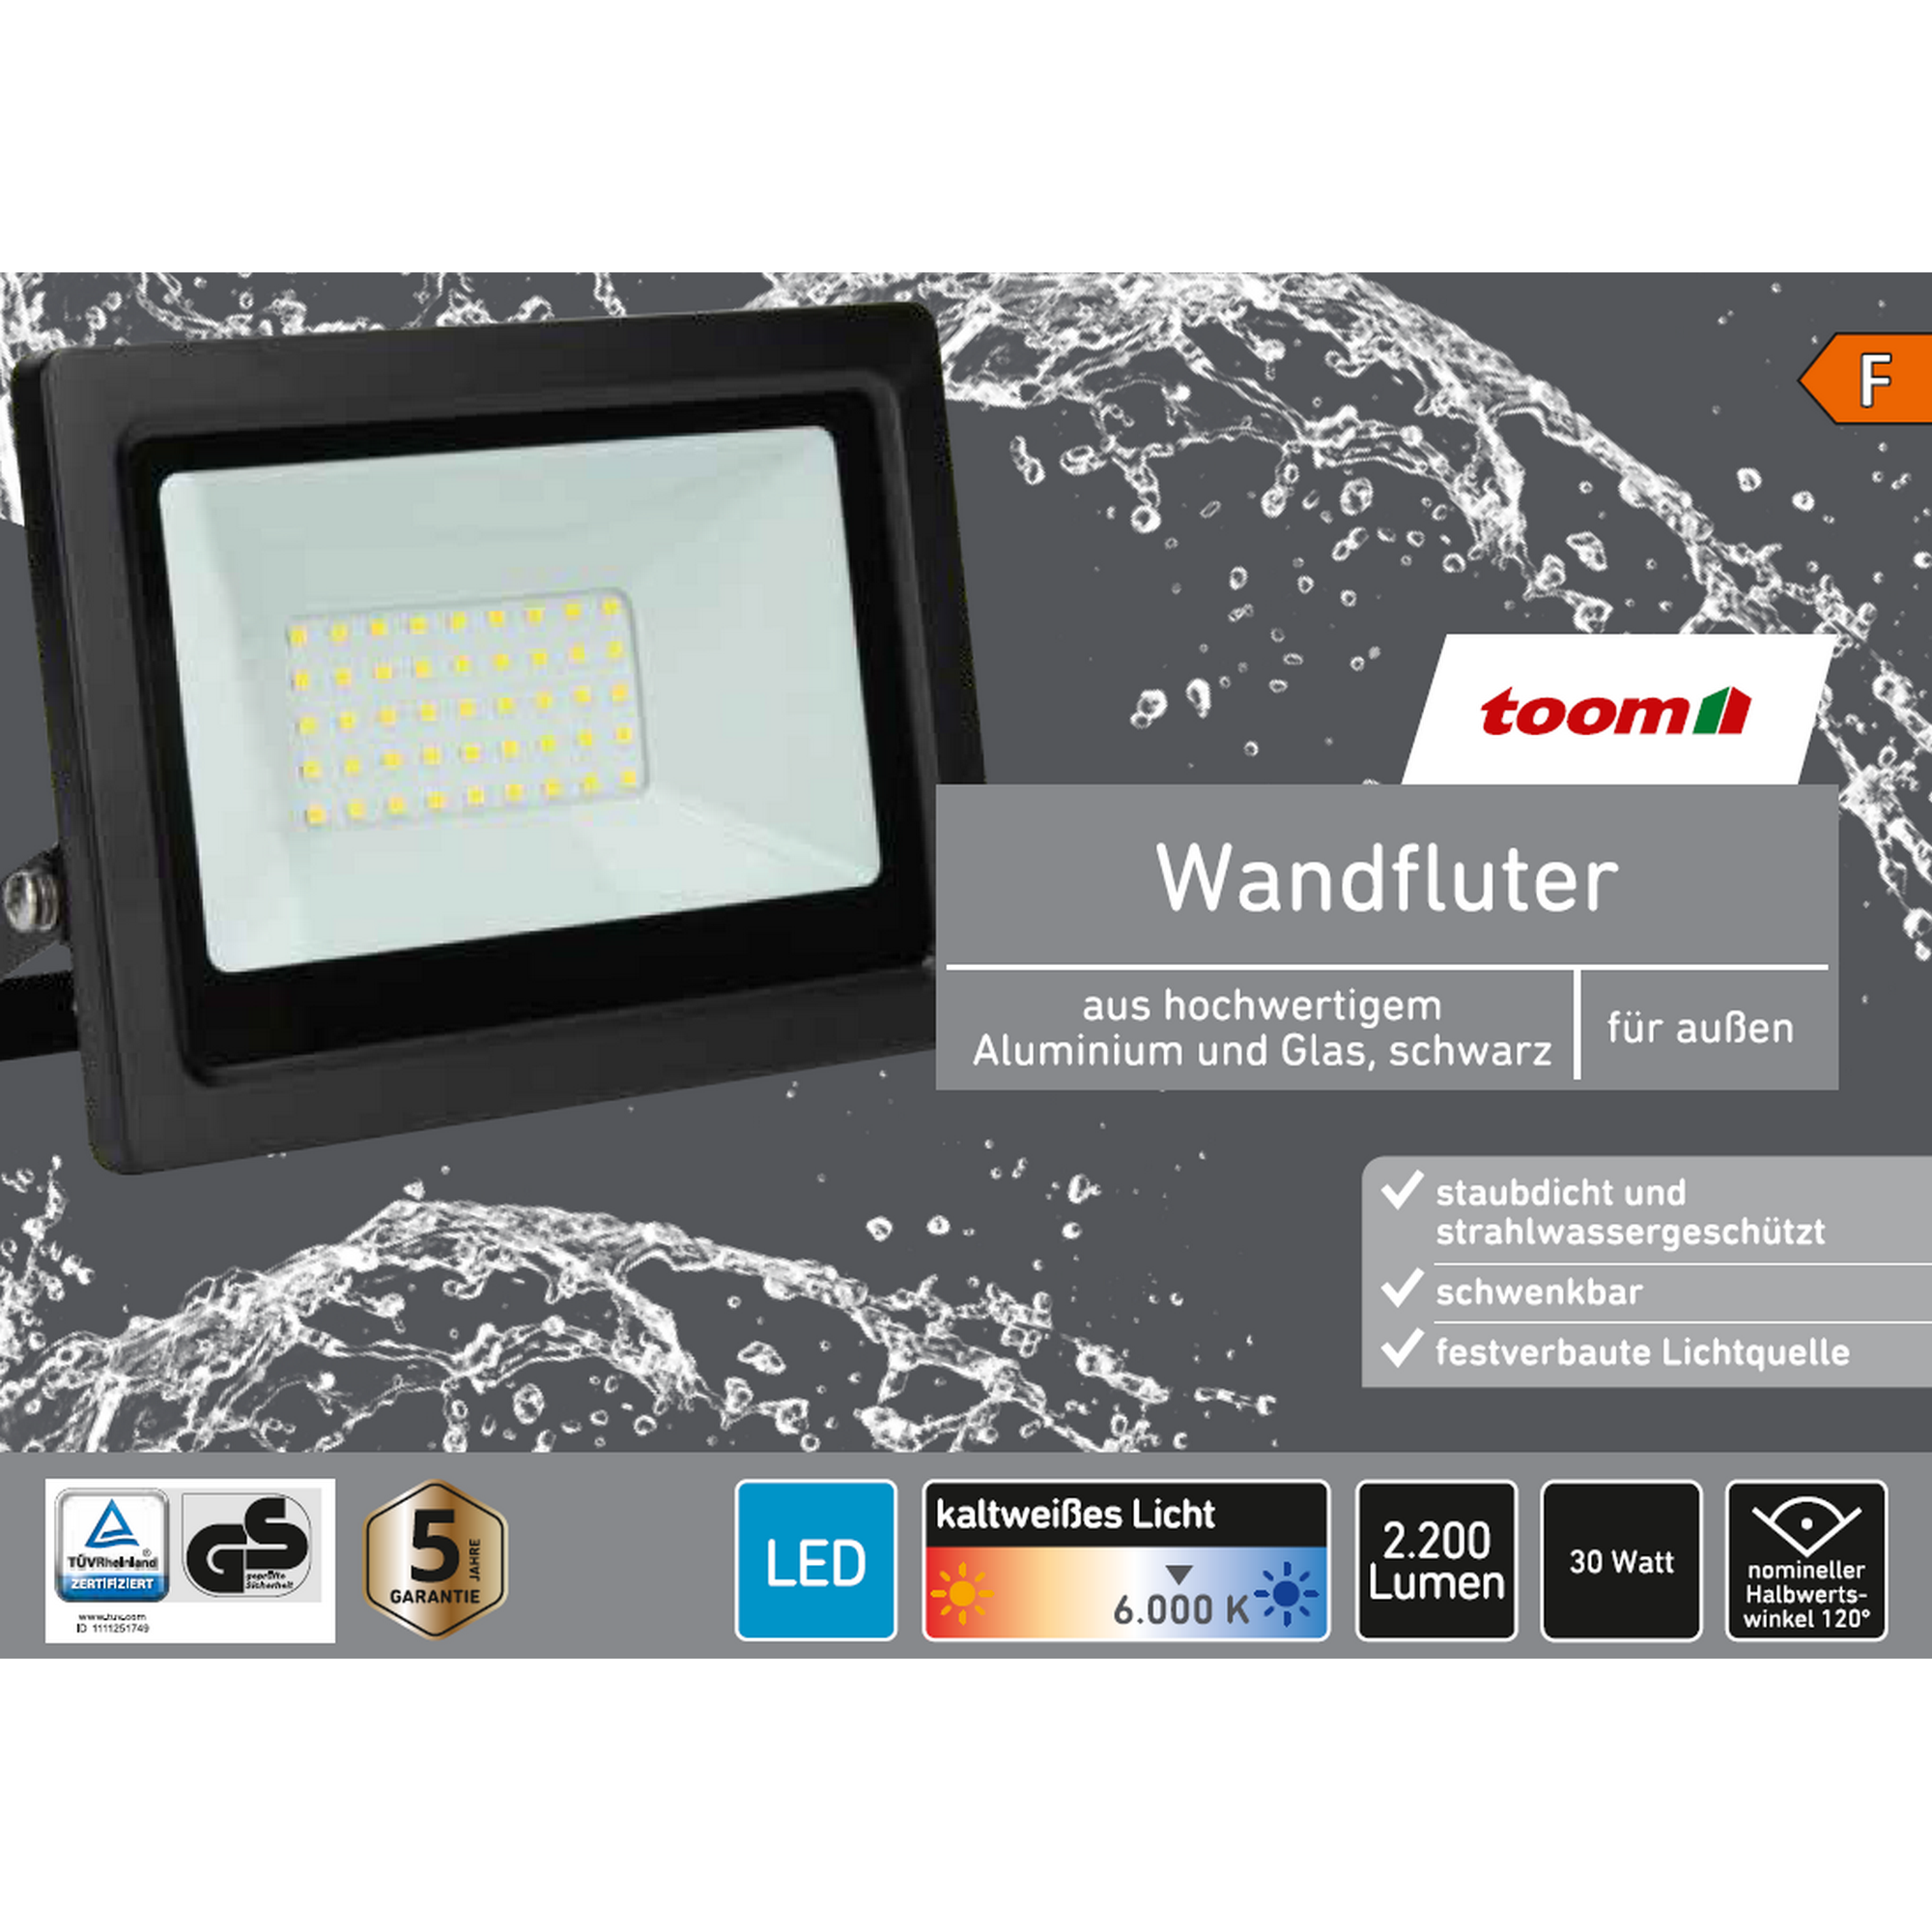 LED-Wandfluter schwarz 30 W 2200 lm + product picture